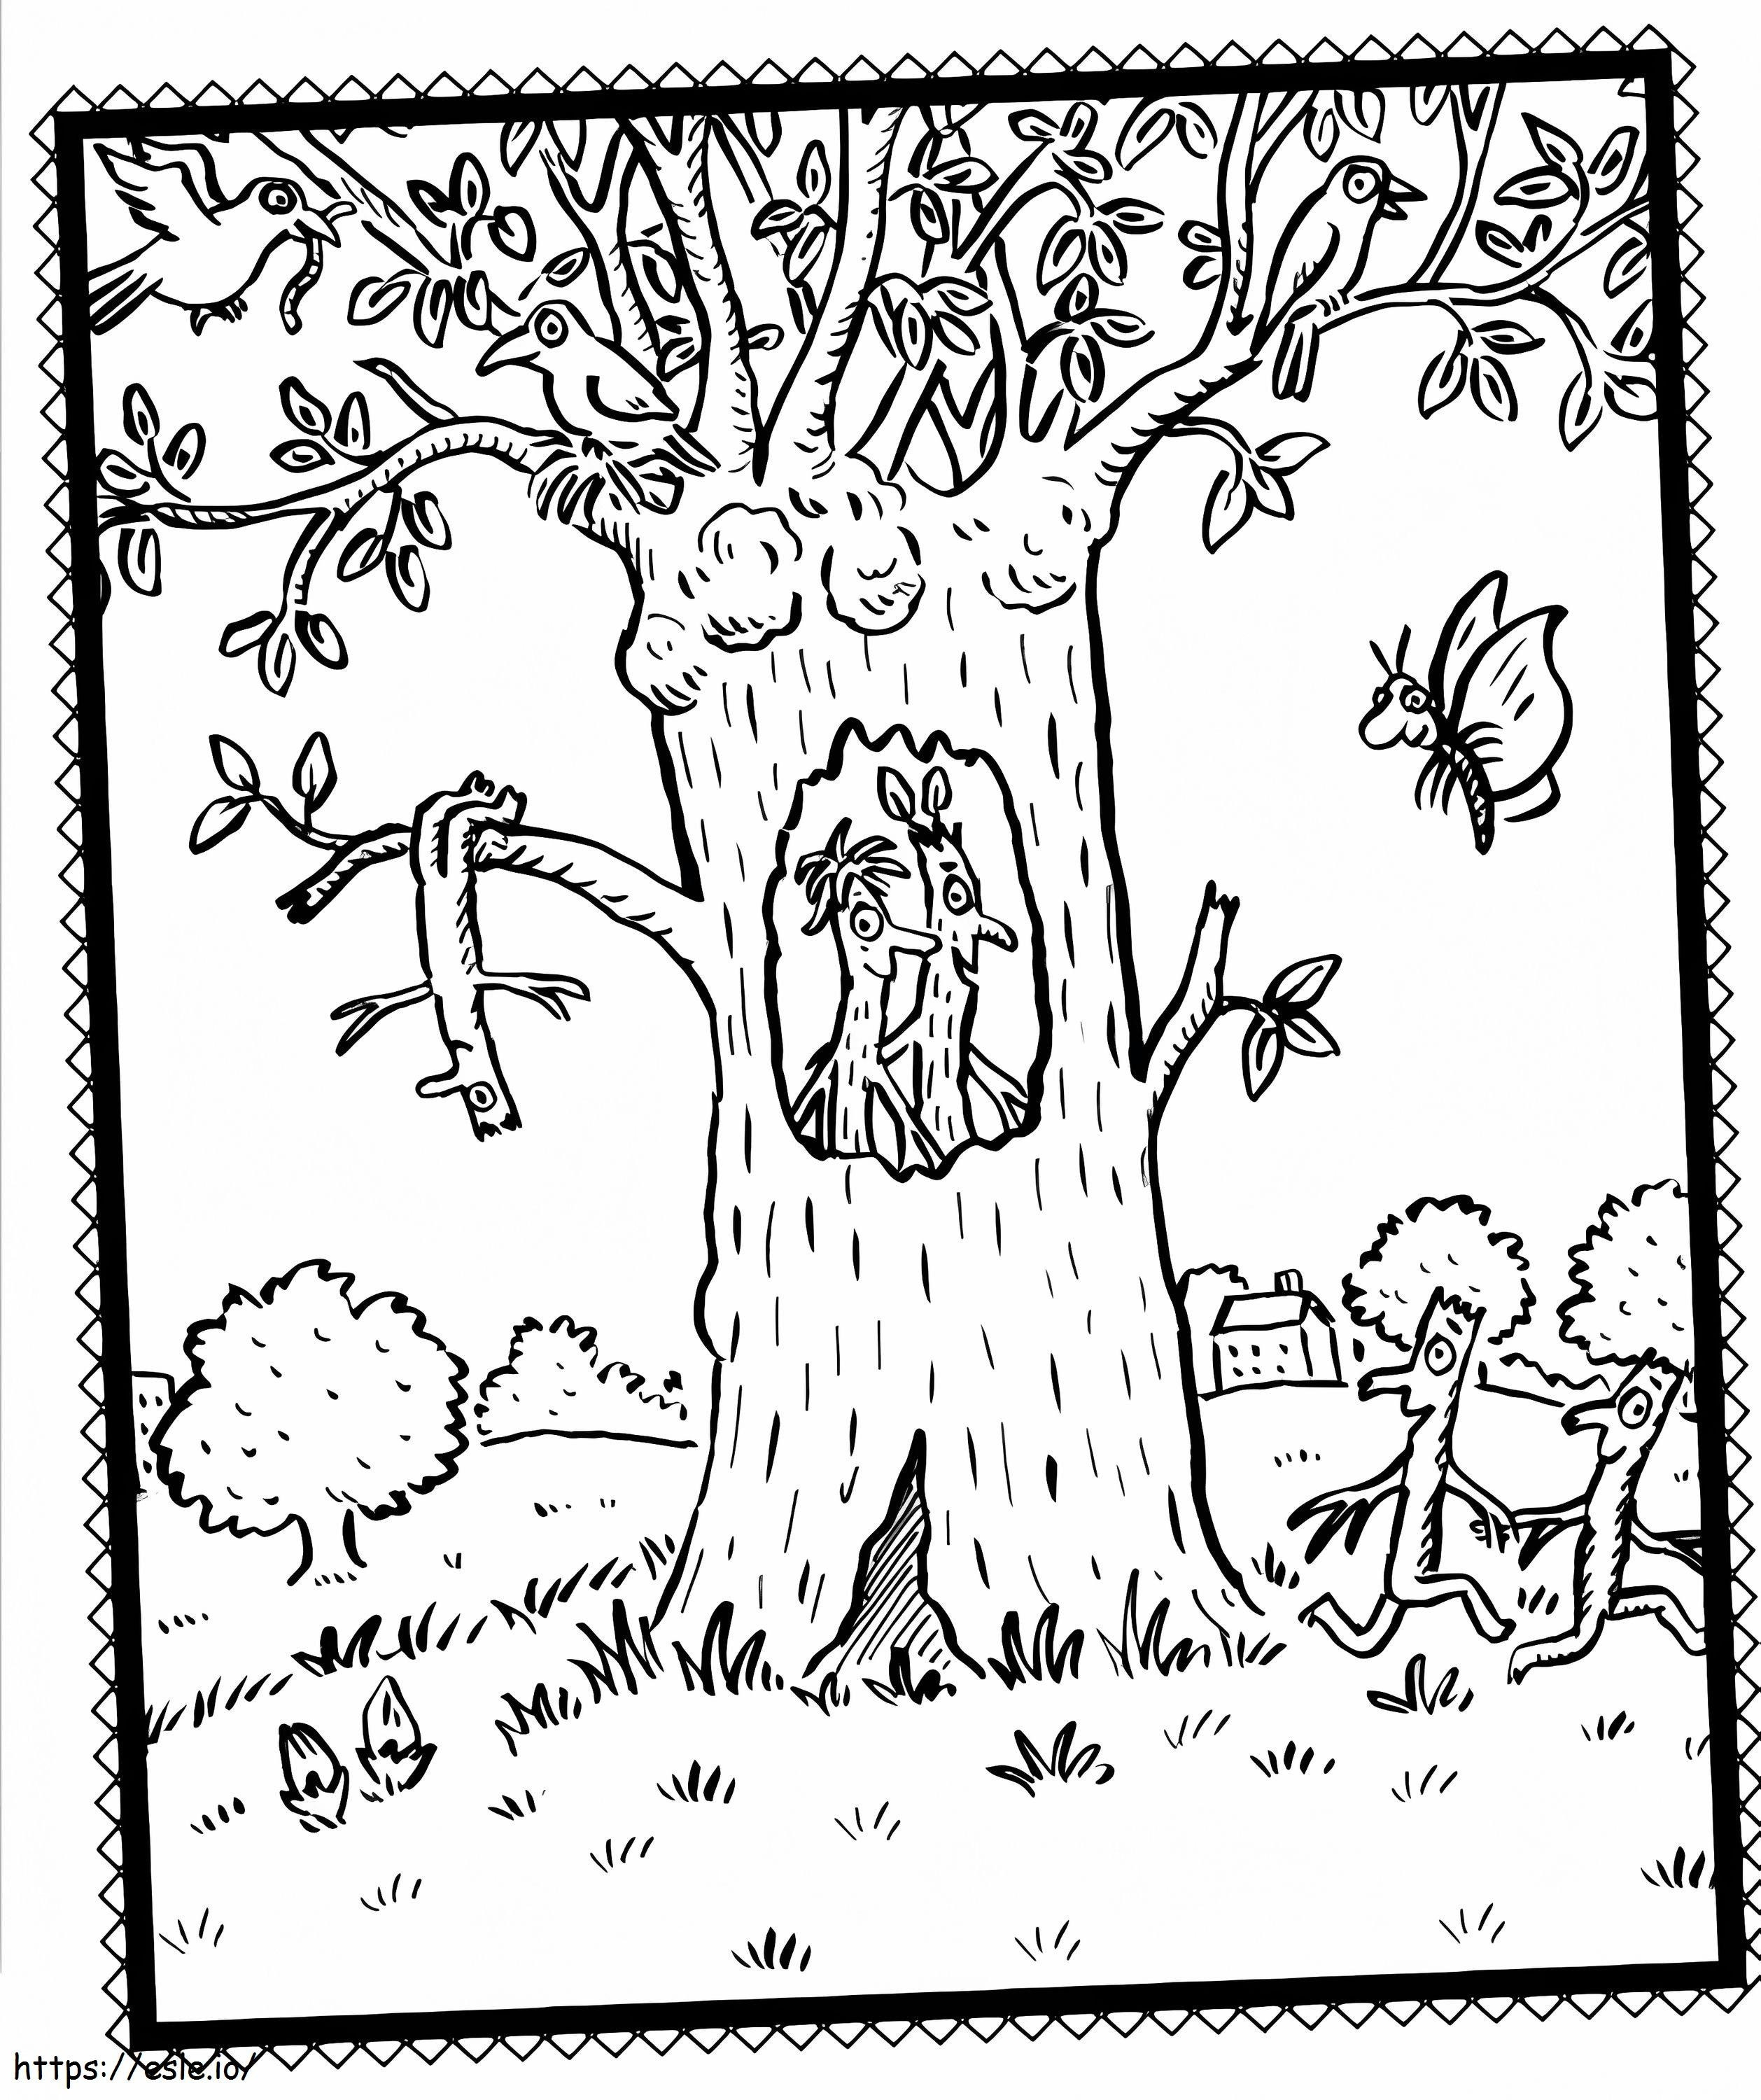 Stick Man On Tree coloring page